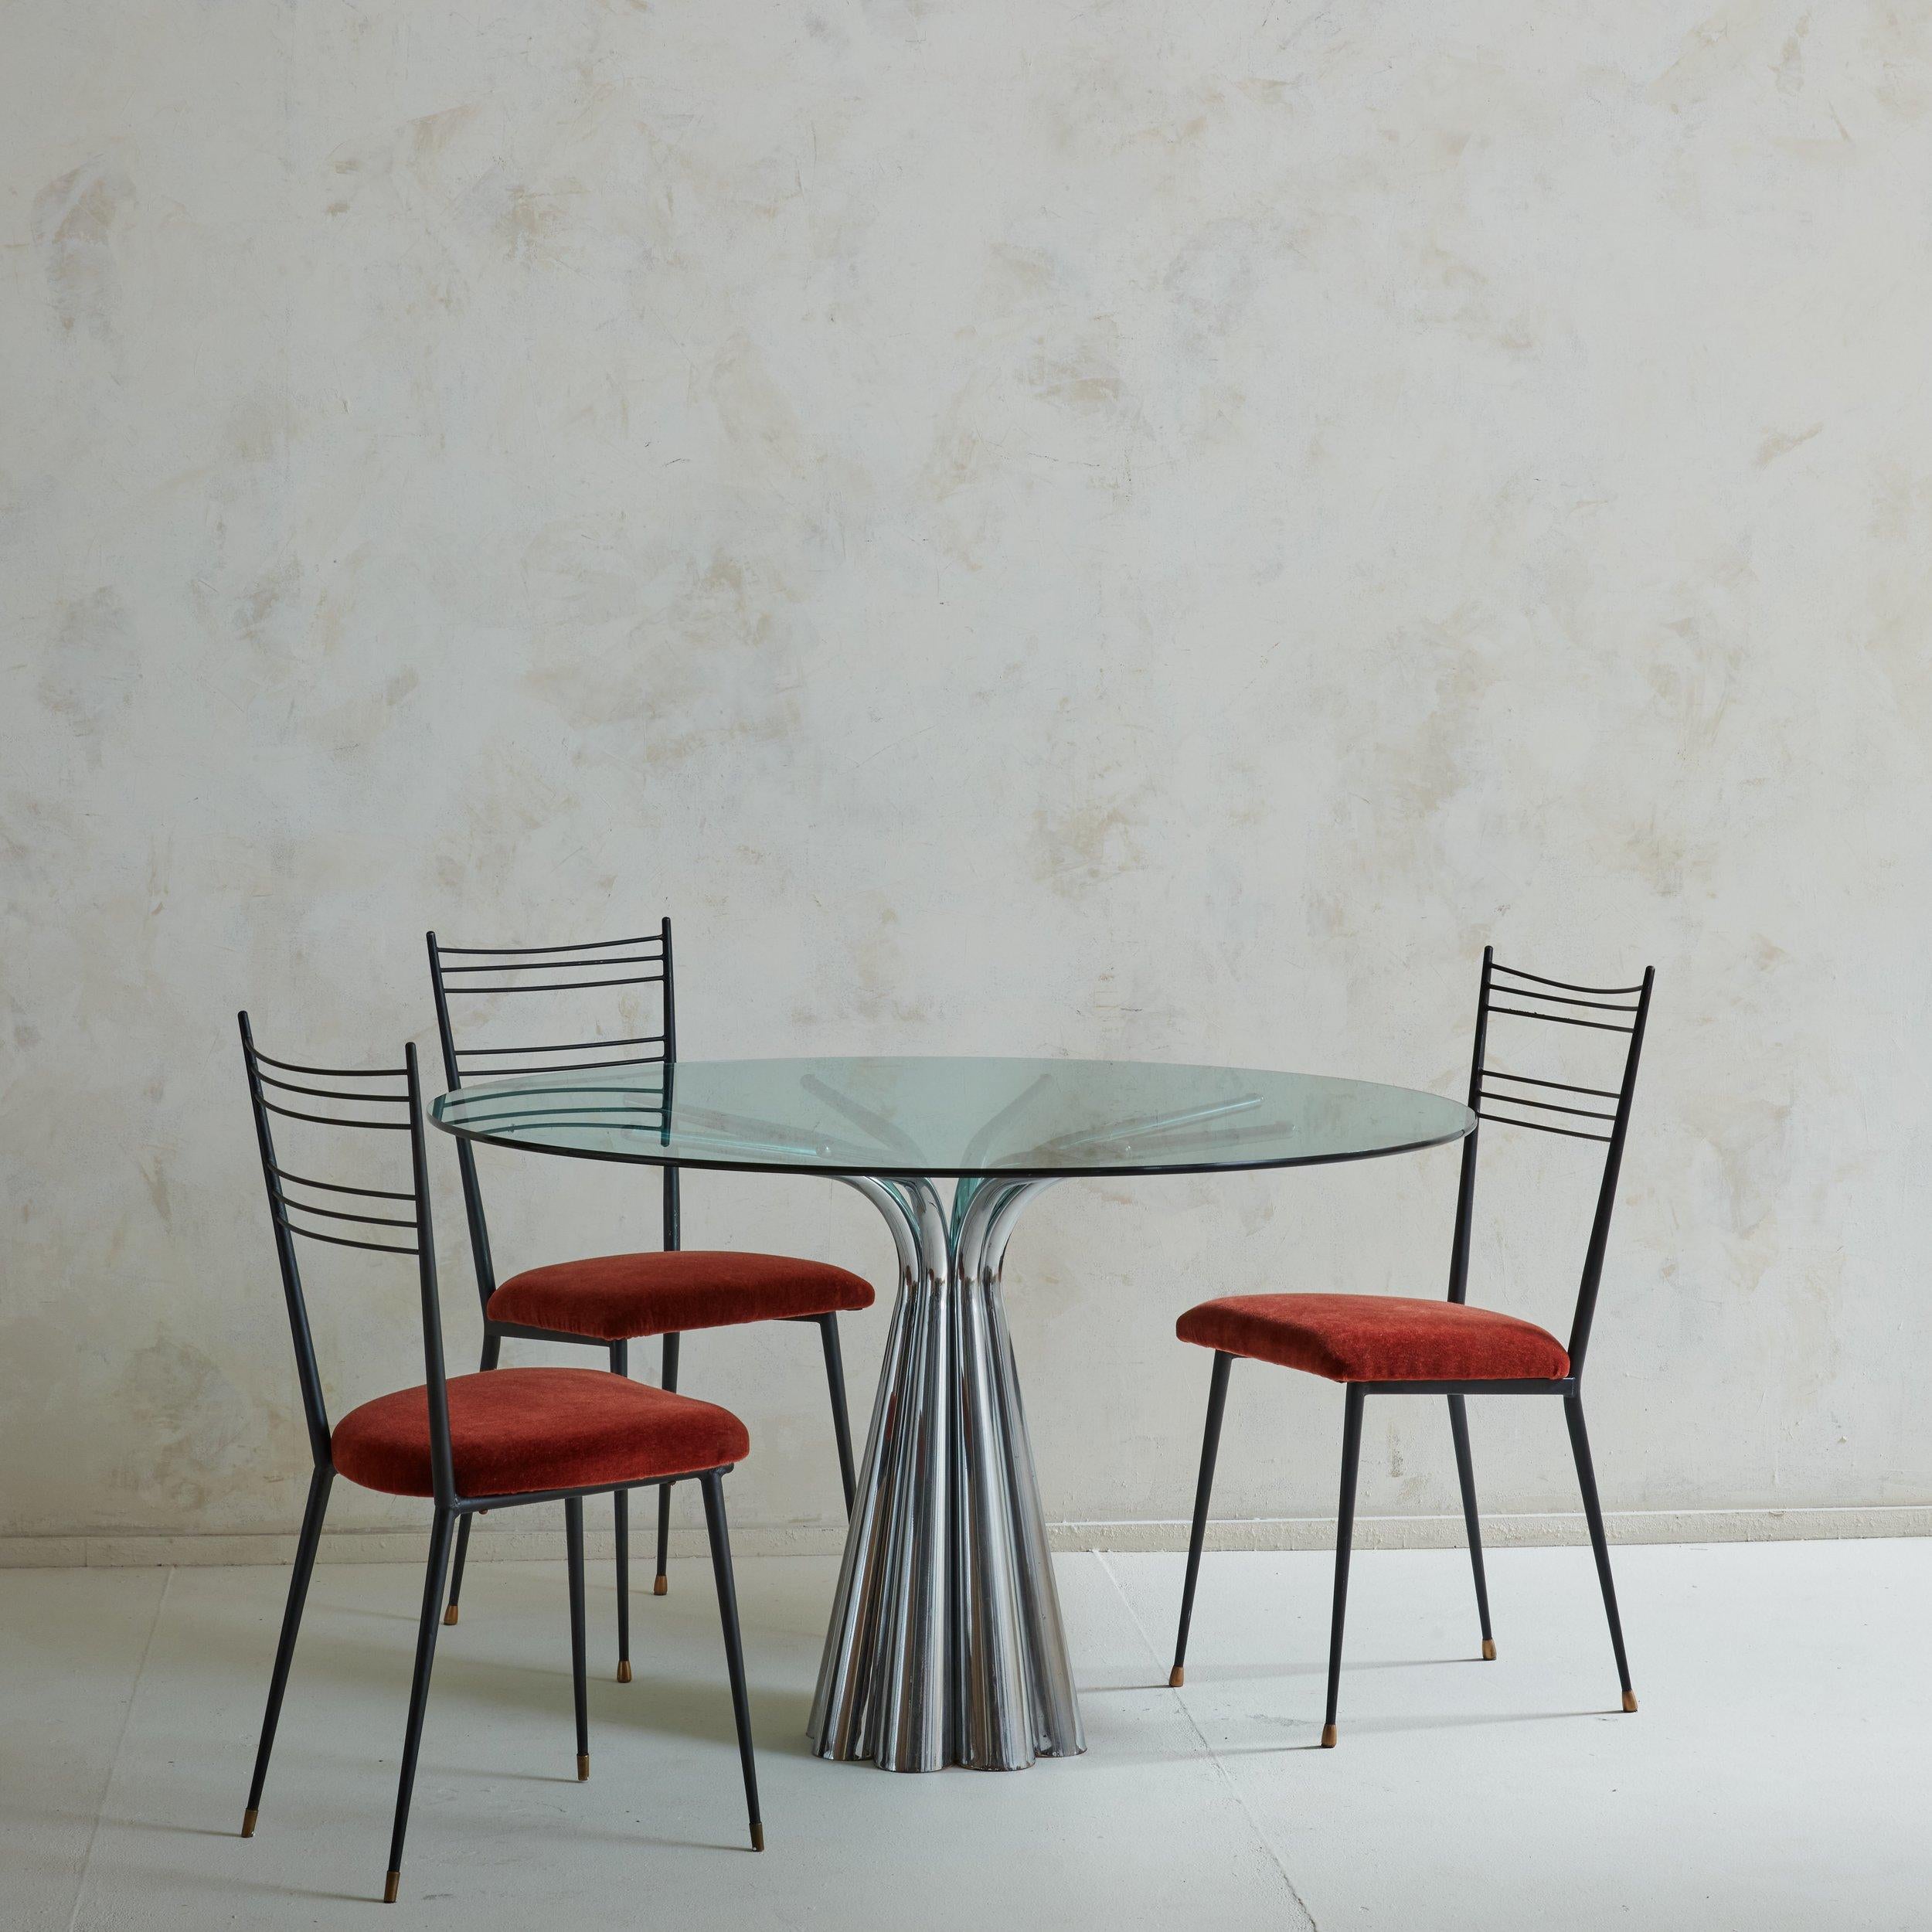 A set of 4 Mid Century French dining chairs attributed to Colette Guedon. These chairs feature sleek black enameled steel frames with tapered legs and patinated brass sabots. The seat backs are composed of six horizontal rods which have a subtle